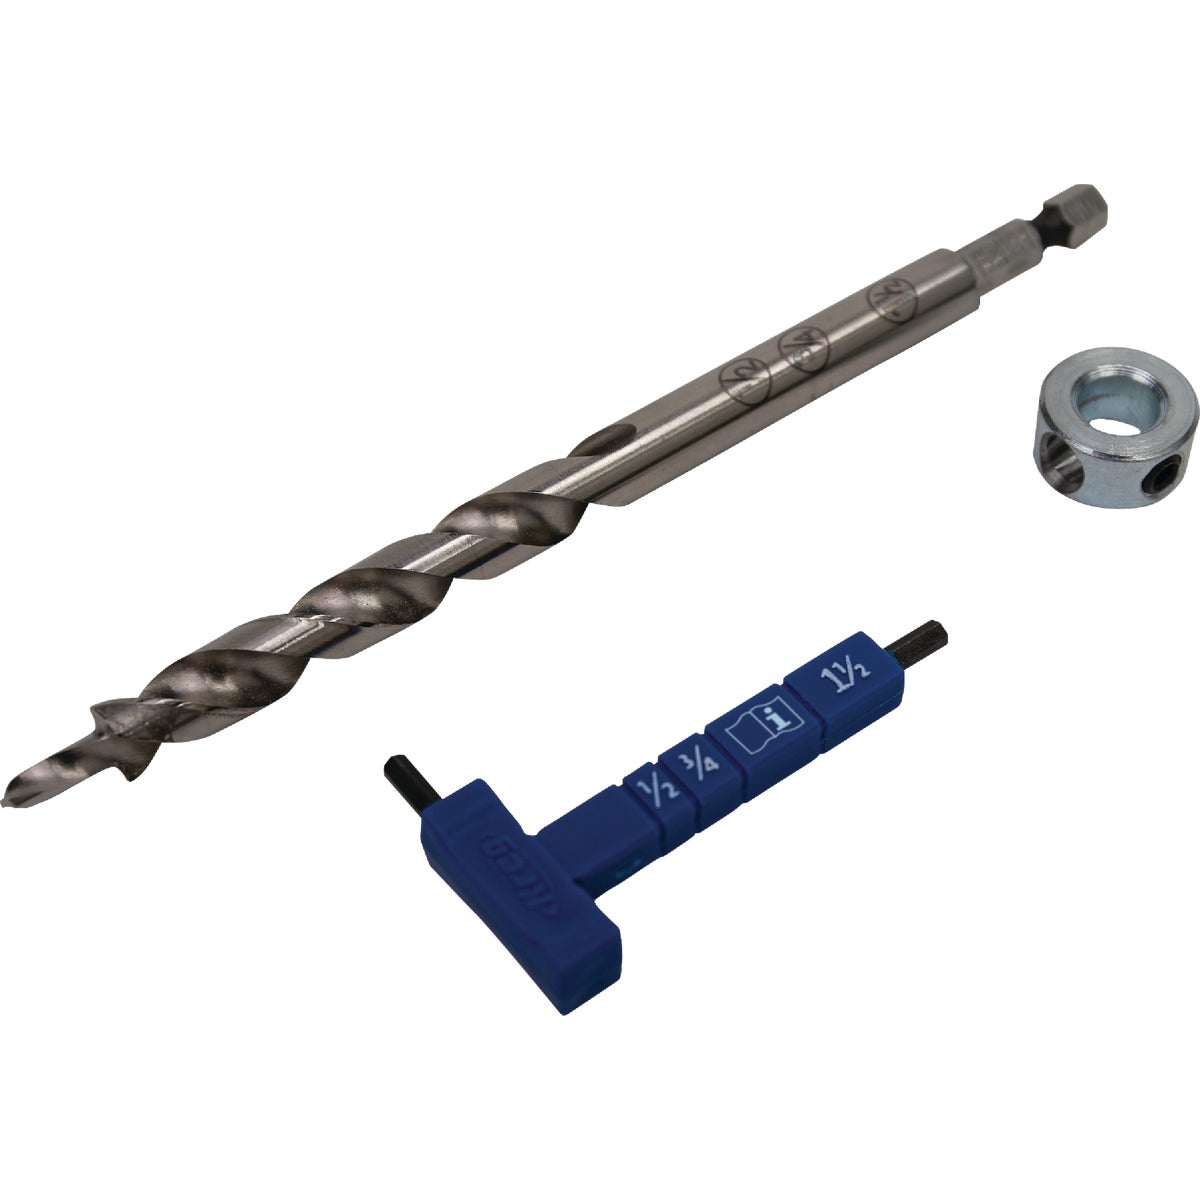 Kreg Easy-Set Step Drill Bit with Stop Collar & Gauge/Hex Wrench for Pocket-Hole Jigs